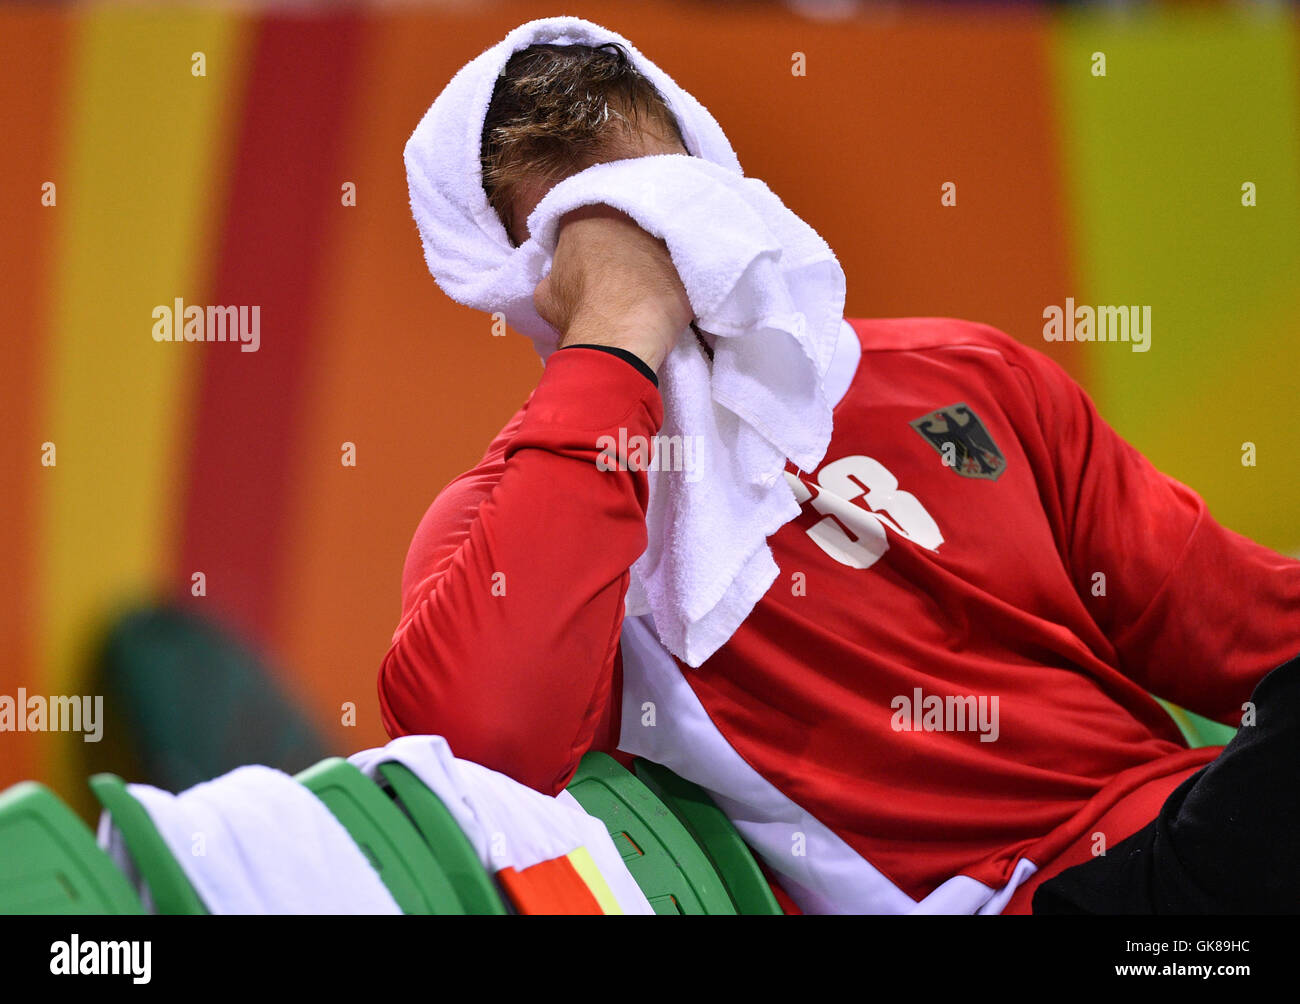 Rio de Janeiro, Brazil. 19th Aug, 2016. Goalkeeper Andreas Wolff of Germany reacts dejected after loosing the Men's Semifinal match between France and Germany of the Handball events during the Rio 2016 Olympic Games in Rio de Janeiro, Brazil, 19 August 2016. Photo: Lukas Schulze /dpa/Alamy Live News Stock Photo